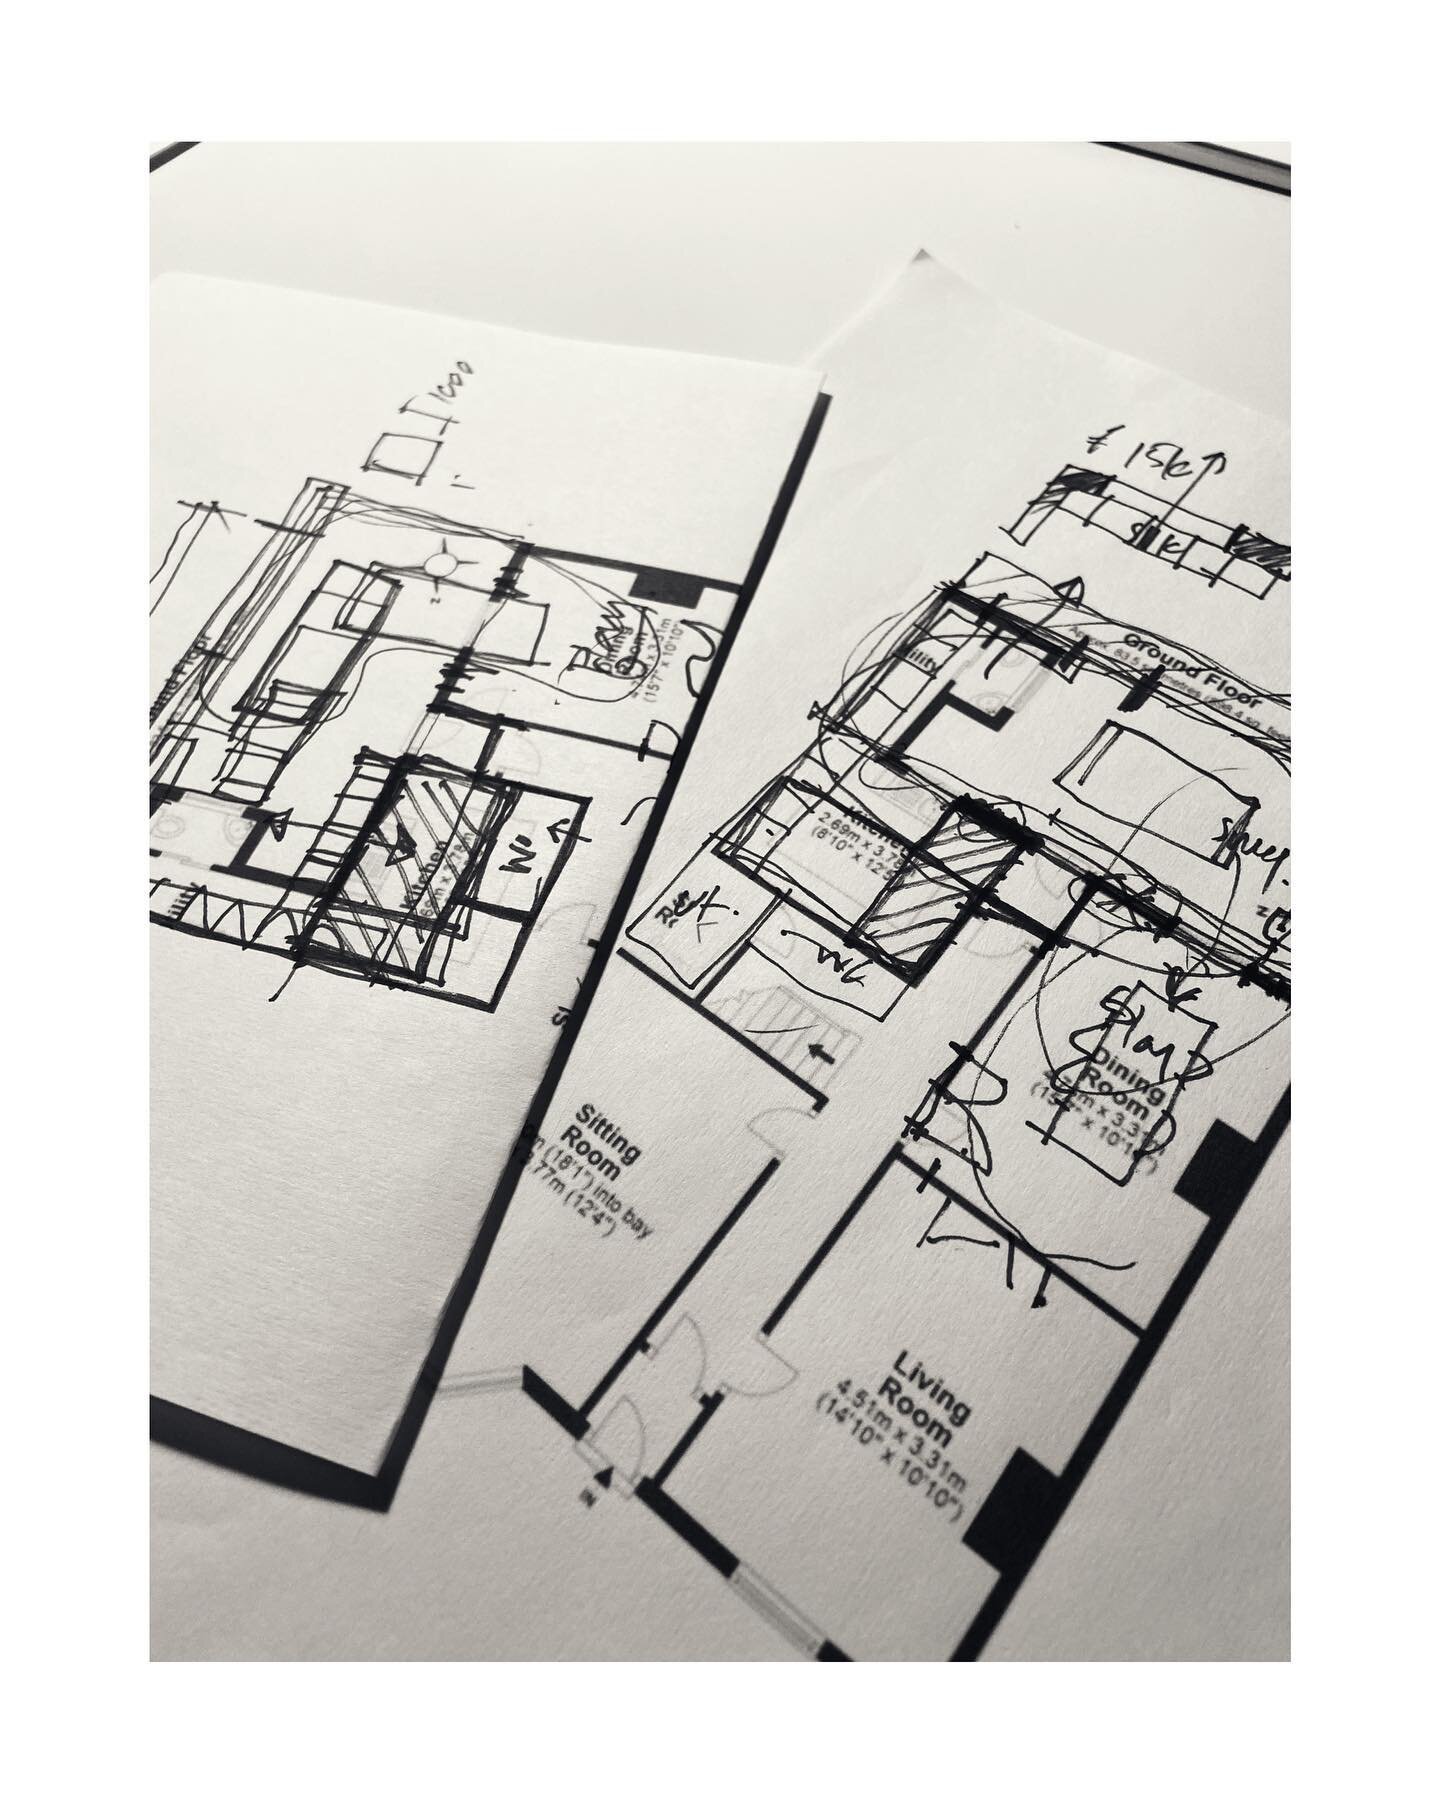 Another great meeting with a new client, discussing plans for a large extension and extensive reconfiguration of the ground floor plan to a period property in Edgbaston. 

Whilst there&rsquo;s a healthy budget, we&rsquo;ve been discussing cost effect